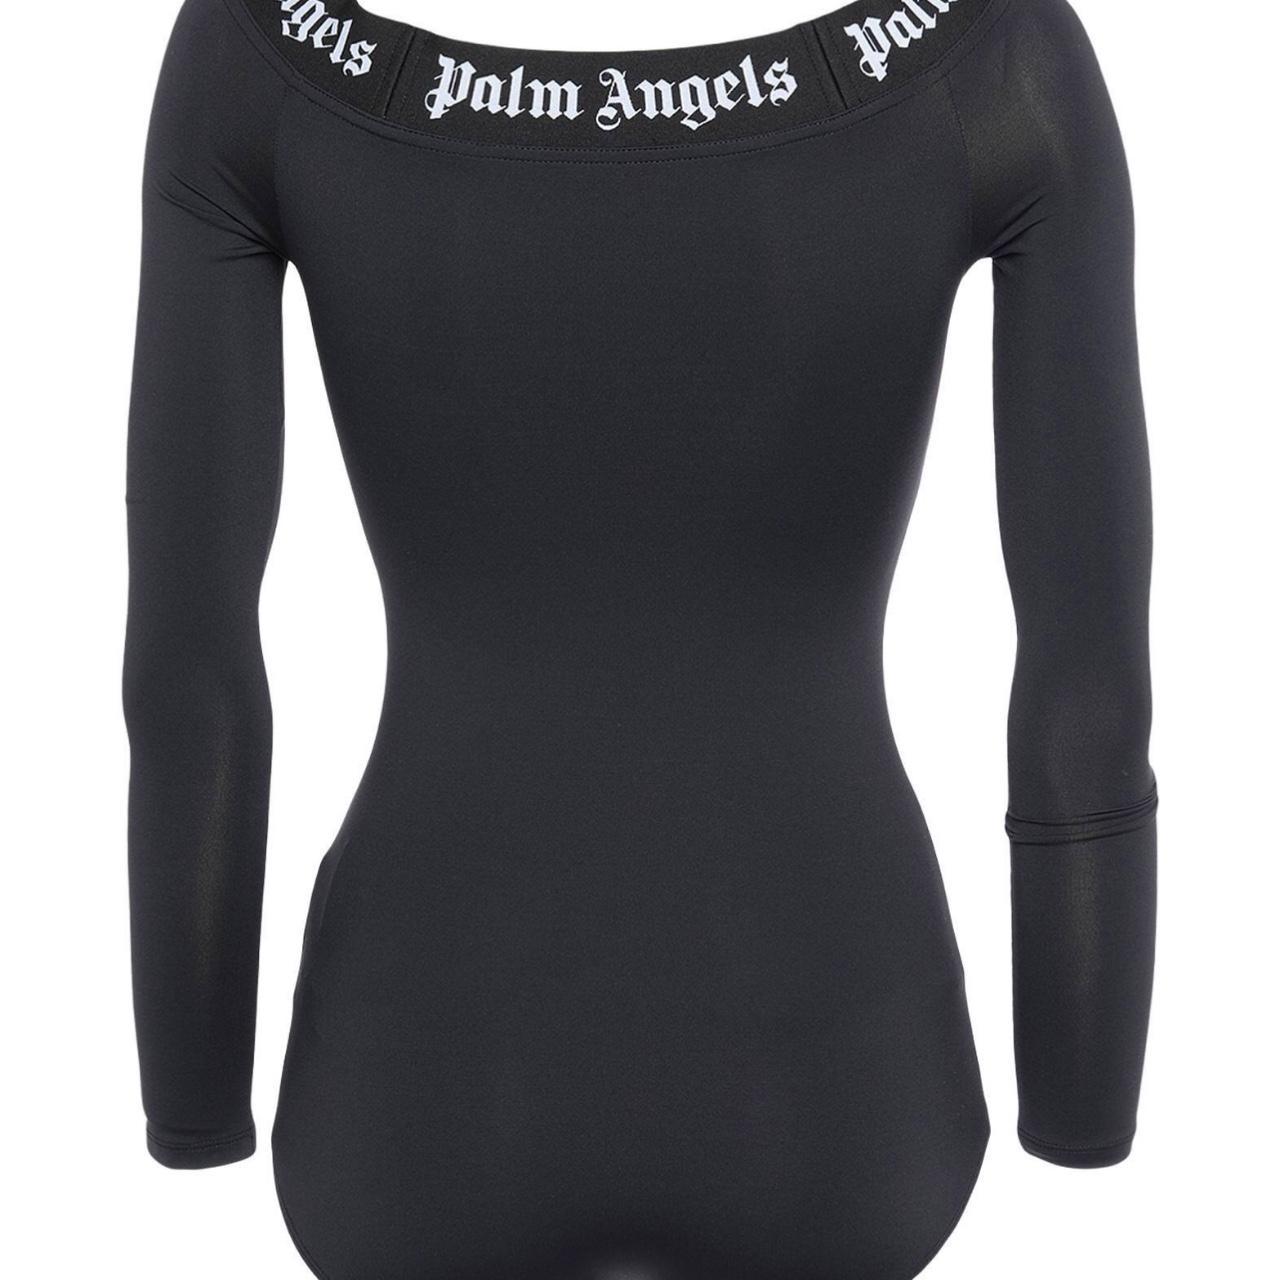 Palm Angels Women's Black and White Bodysuit